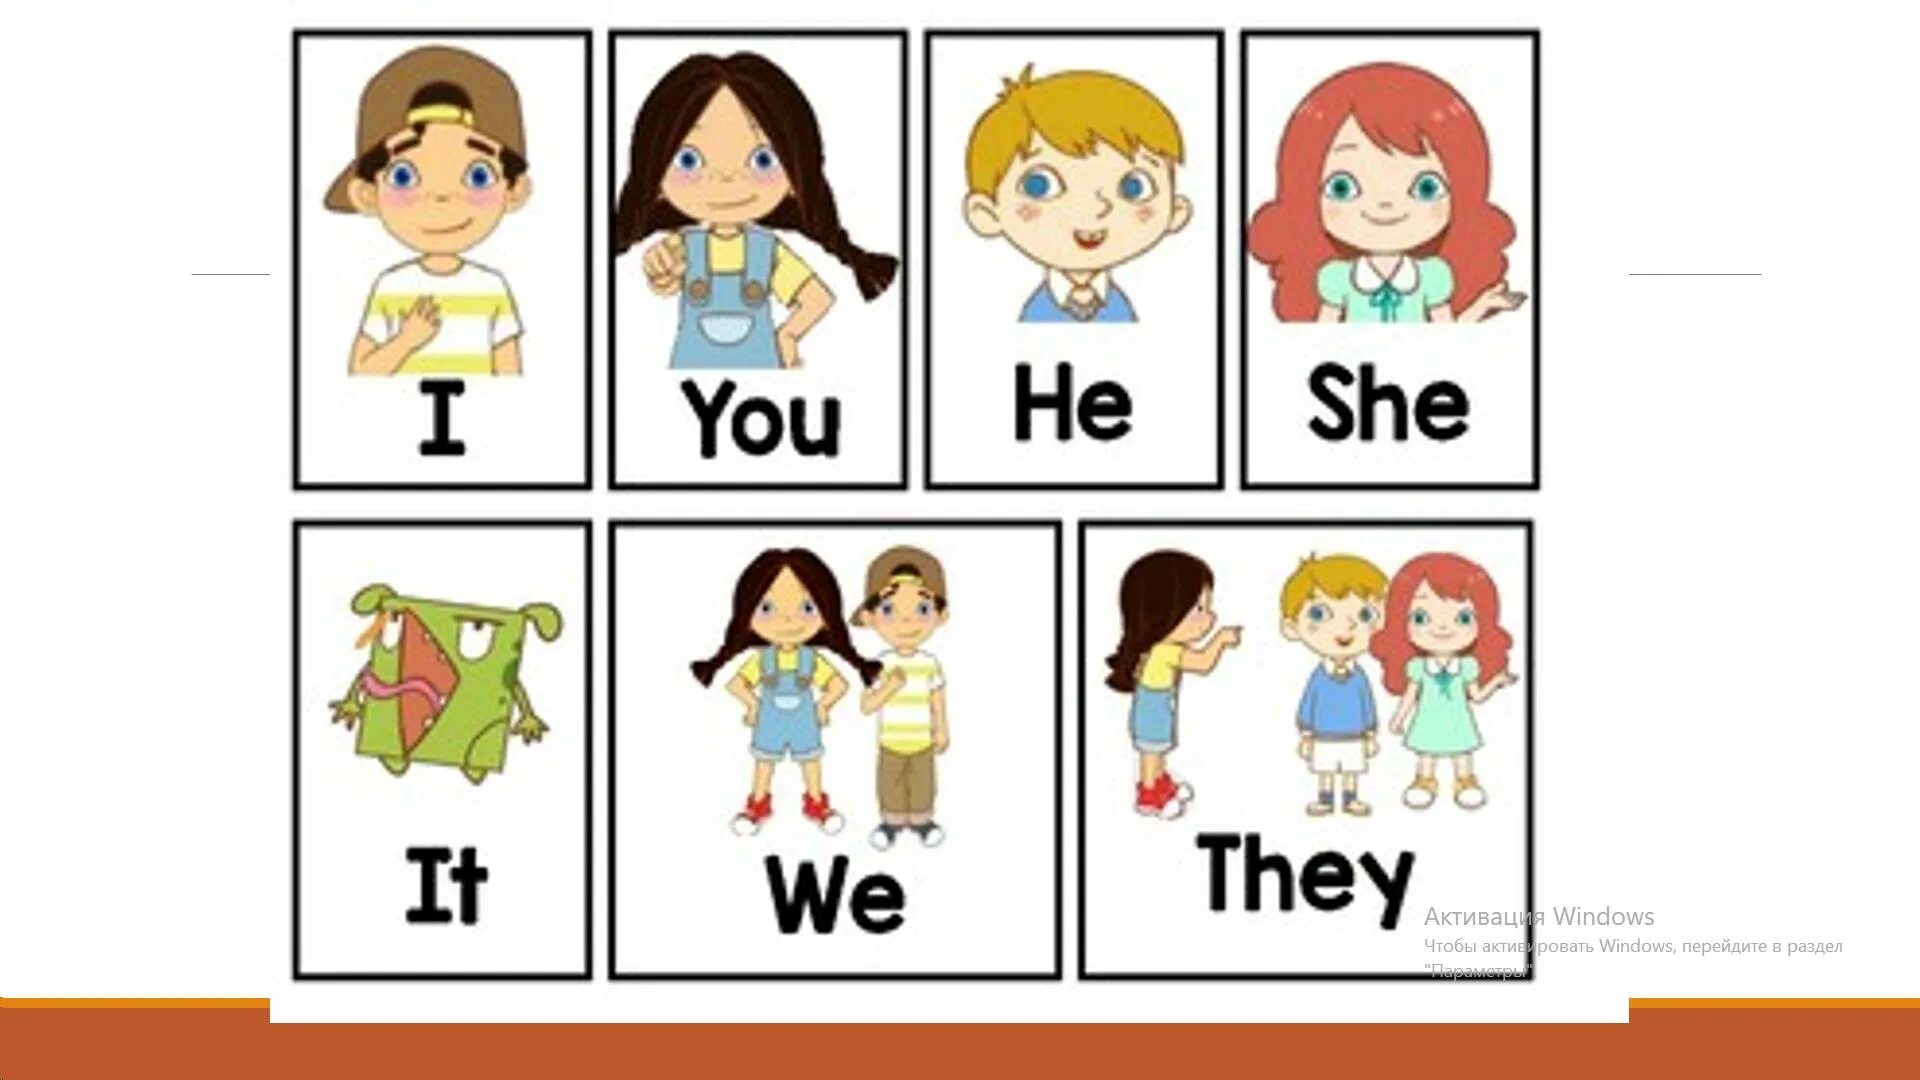 Children he she it they. Местоимения i he she it. Местоимения i, you, he, she, it, we, they,. Картинки he she it. He she it Flashcards for Kids.